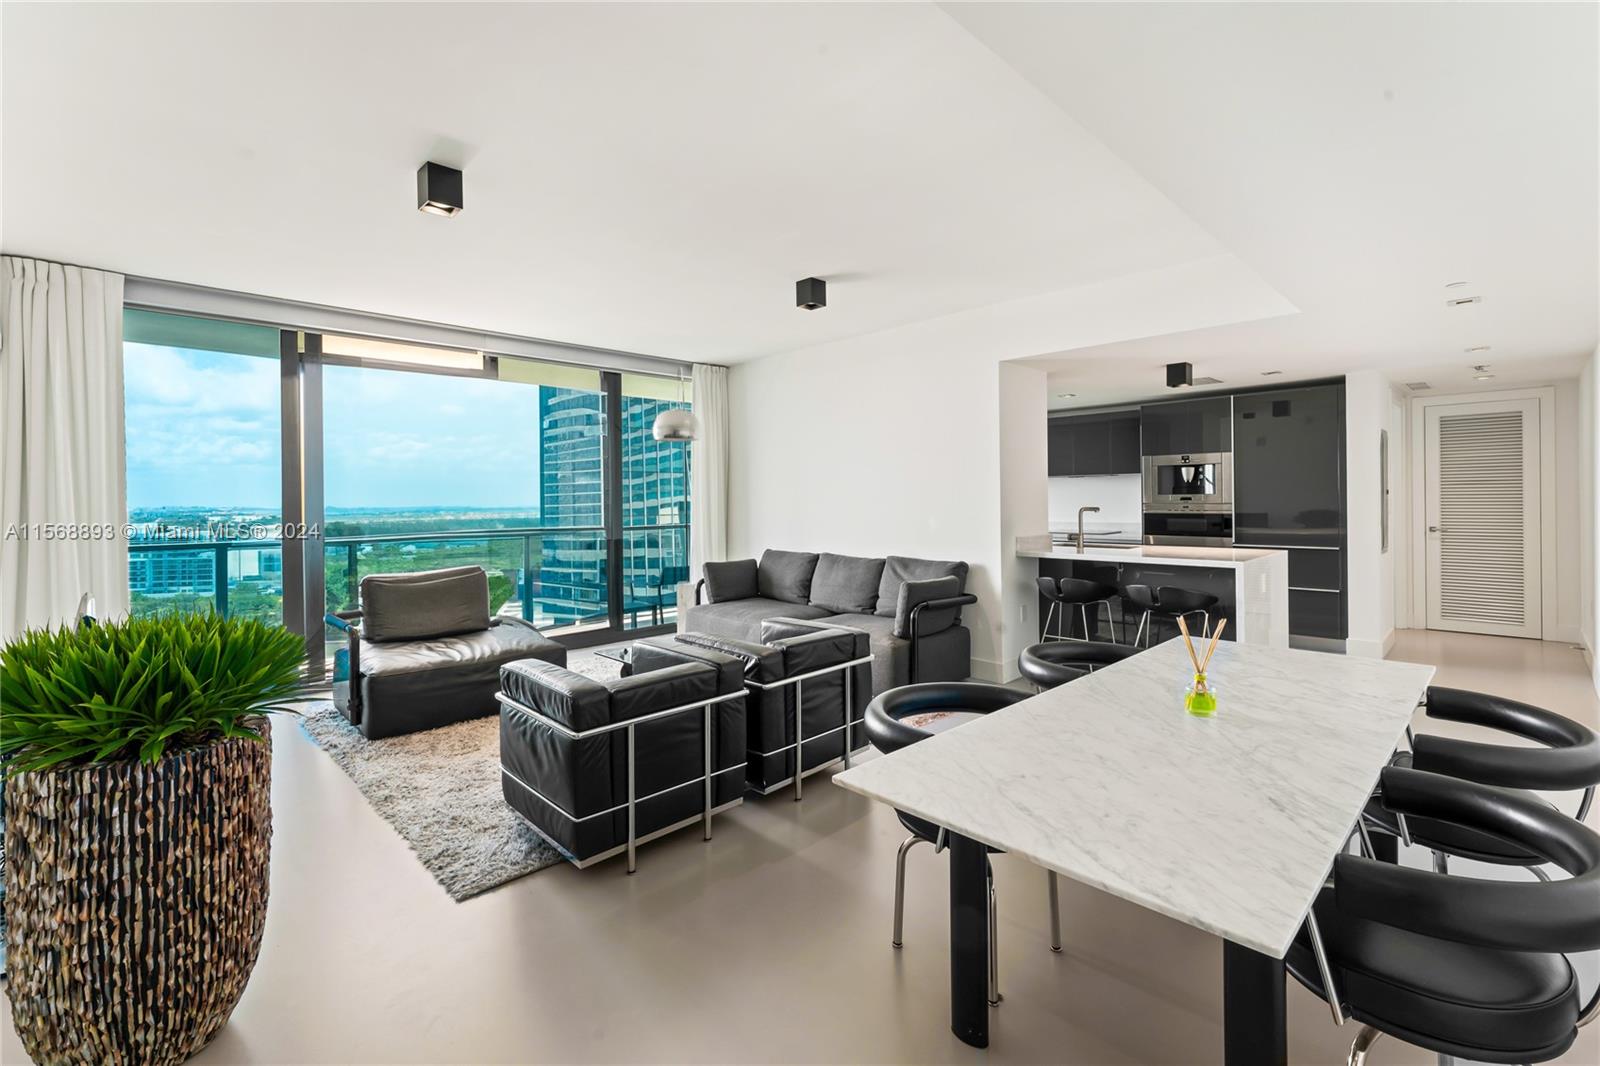 Echo Brickell #1905, nestled in the heart of Miami’s most prestigious neighborhood, is a beacon of luxury living and architectural innovation.  This 1,123 S.F. 2/2, split floorplan has epoxy flooring throughout, Poggenpohl Kitchen cabinets an expansive terrace with summer kitchen and smart home technology and 2 assigned parking spaces. The building's lavish amenities include a vanishing-edge pool overlooking the bay, a state-of-the-art gym, full concierge services, and a pet-friendly policy with a dog walker on call. Whether it’s the vibrant culture, the thriving business environment, or the serene ocean vistas, Echo Brickell is not just a residence—it’s a gateway to the epitome of opulent urban living.